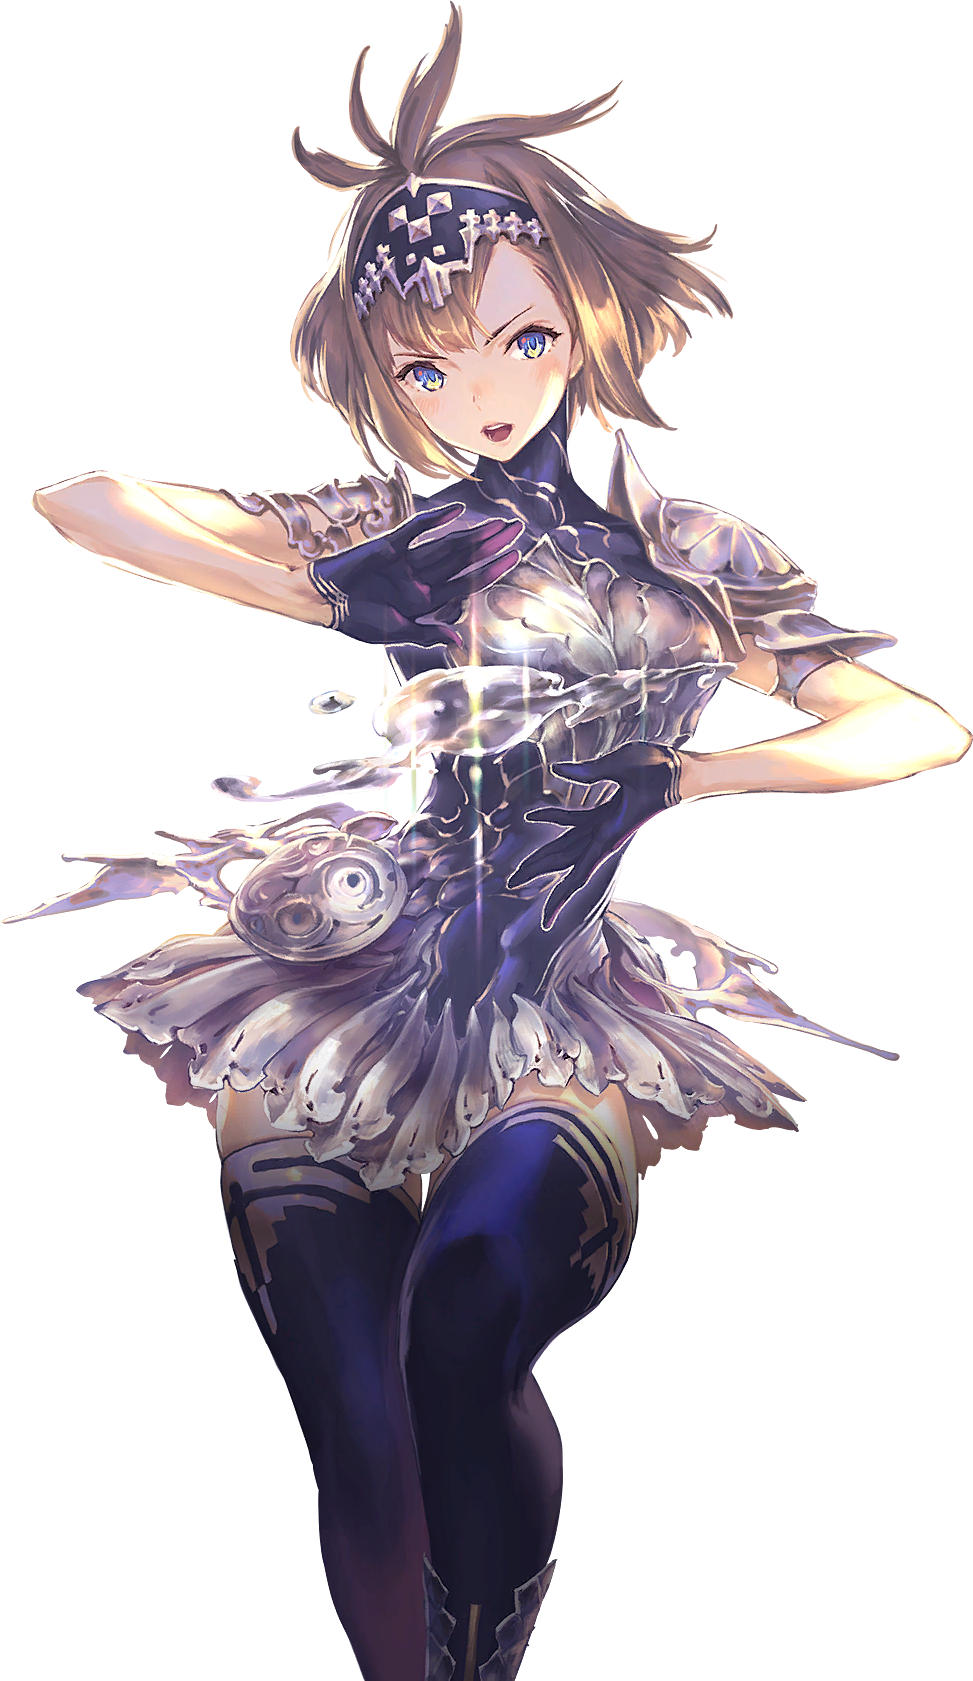 Shadowverse on X: Shion from Shadowverse Flame is coming to